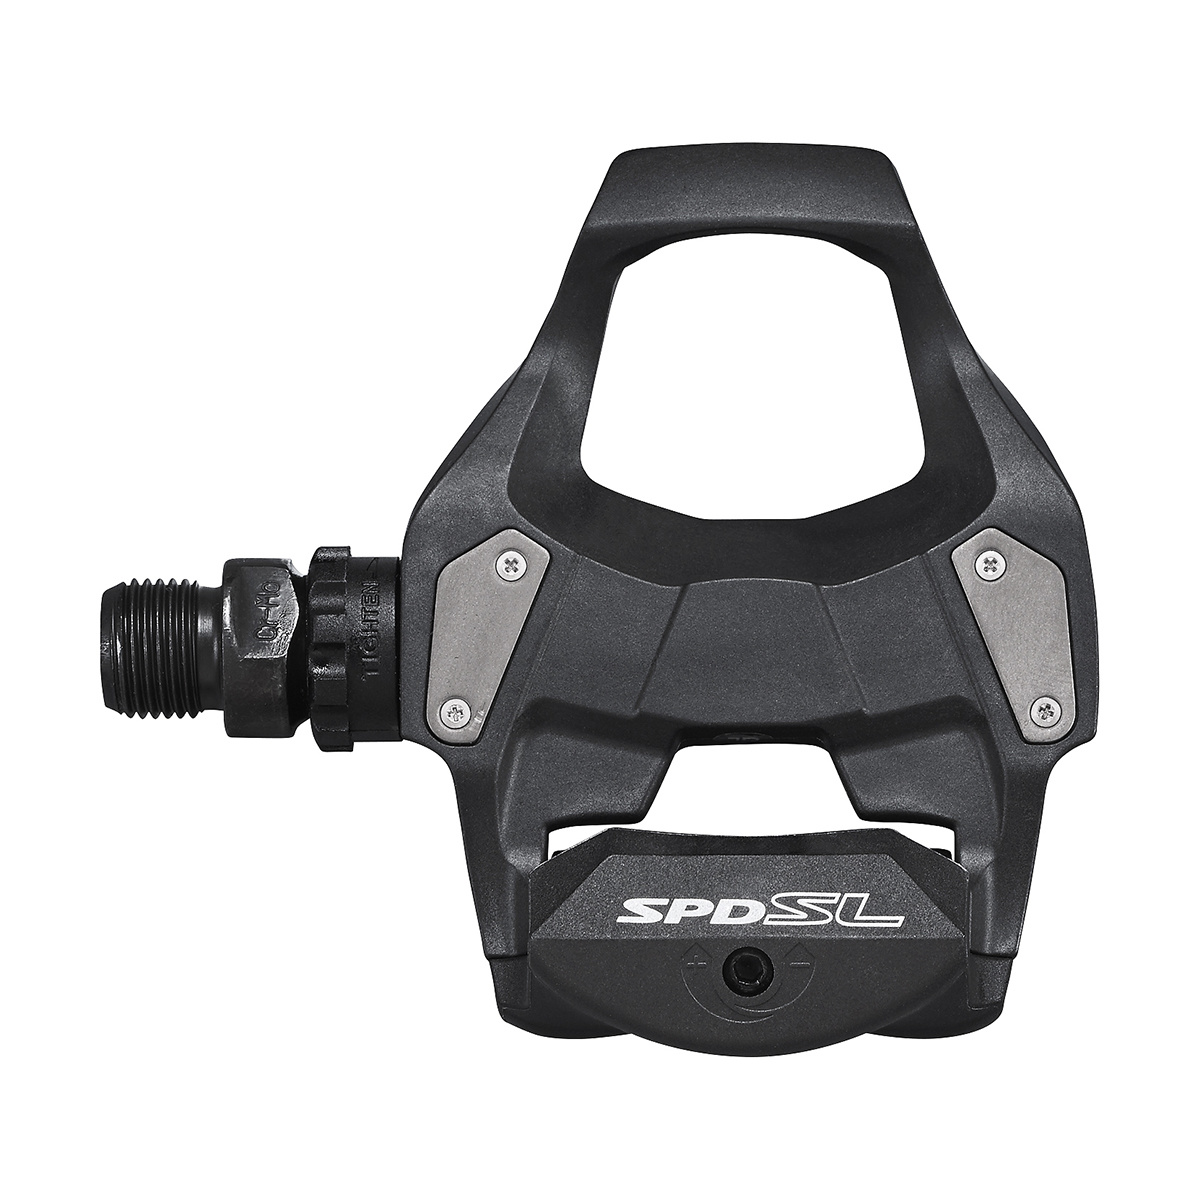 SHIMANO SPD-SL PDRS500 - GEJO-Cycleworld